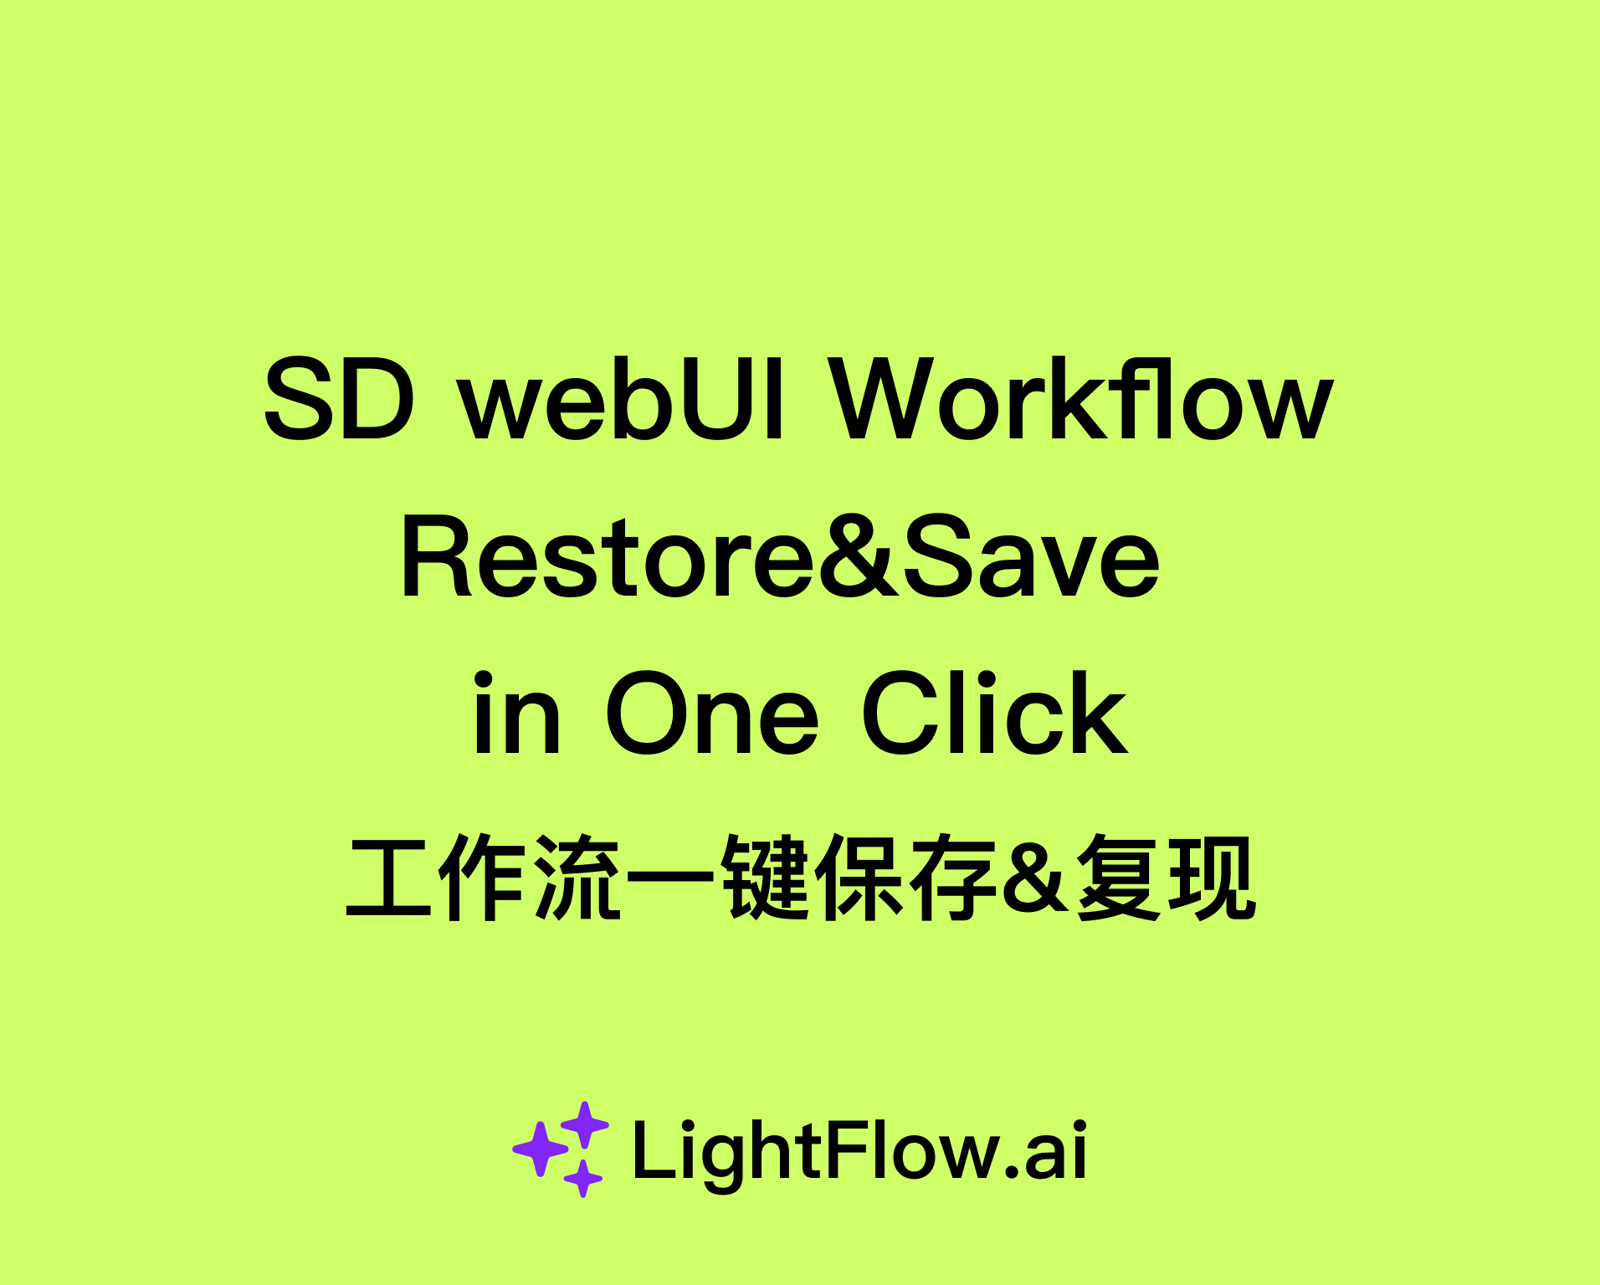 Say hi to WORKFLOW! Step into the future of effortless SD use